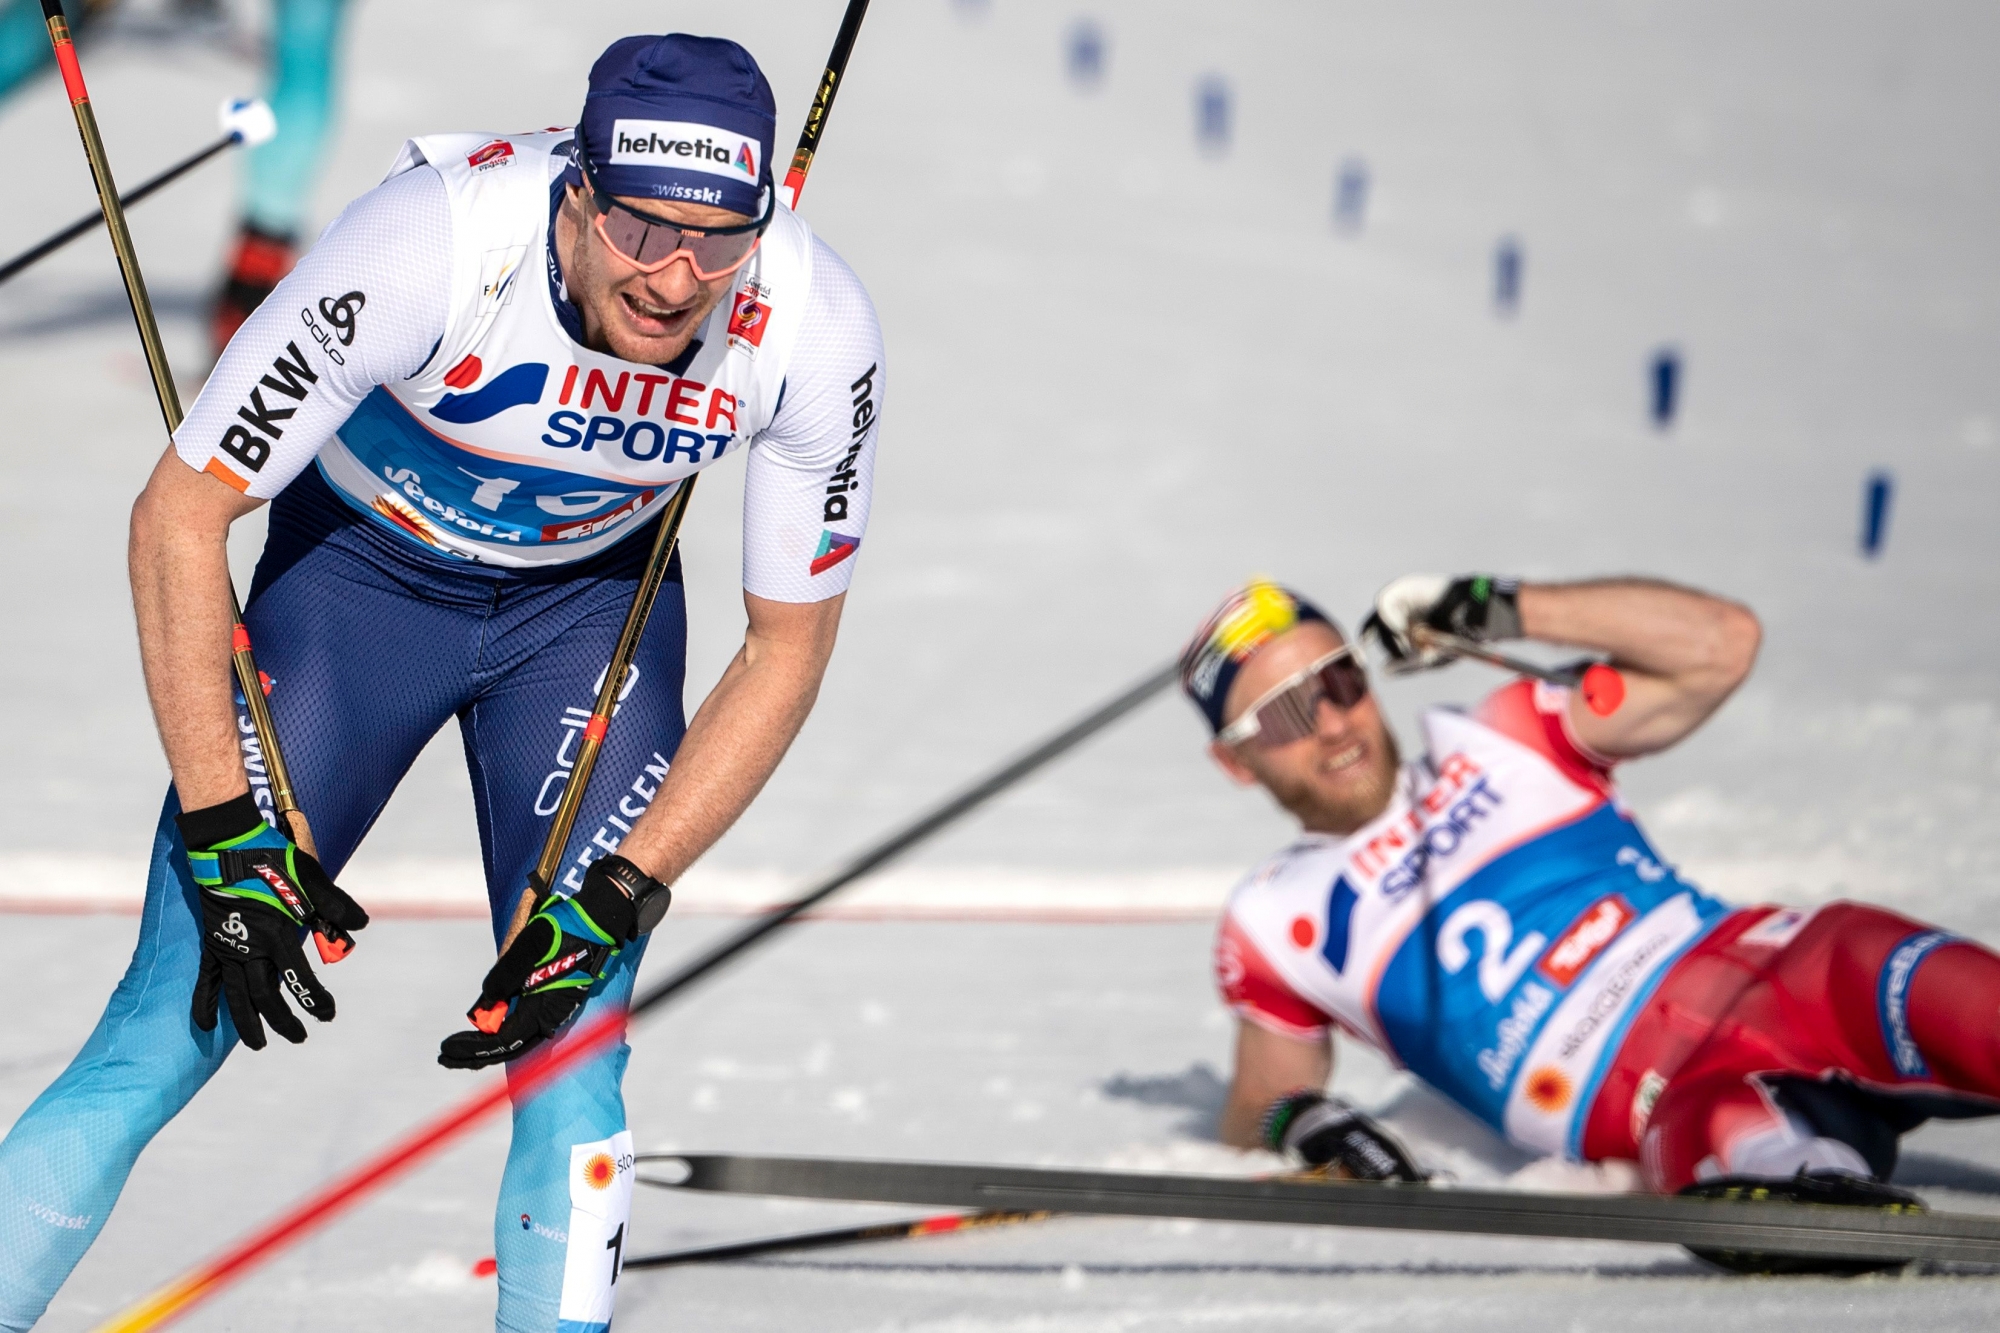 Switzerland's Dario Cologna reacts in the finish area after the men mass start 50km skating cross country competition at the Cross Country Arena Seefeld at the 2019 Nordic Skiing World Championships in Seefeld, Austria, on Sunday, 03 March 2019. (KEYSTONE/Peter Schneider) AUSTRIA 2019 NORDIC SKIING WORLDS CROSS COUNTRY SKIING